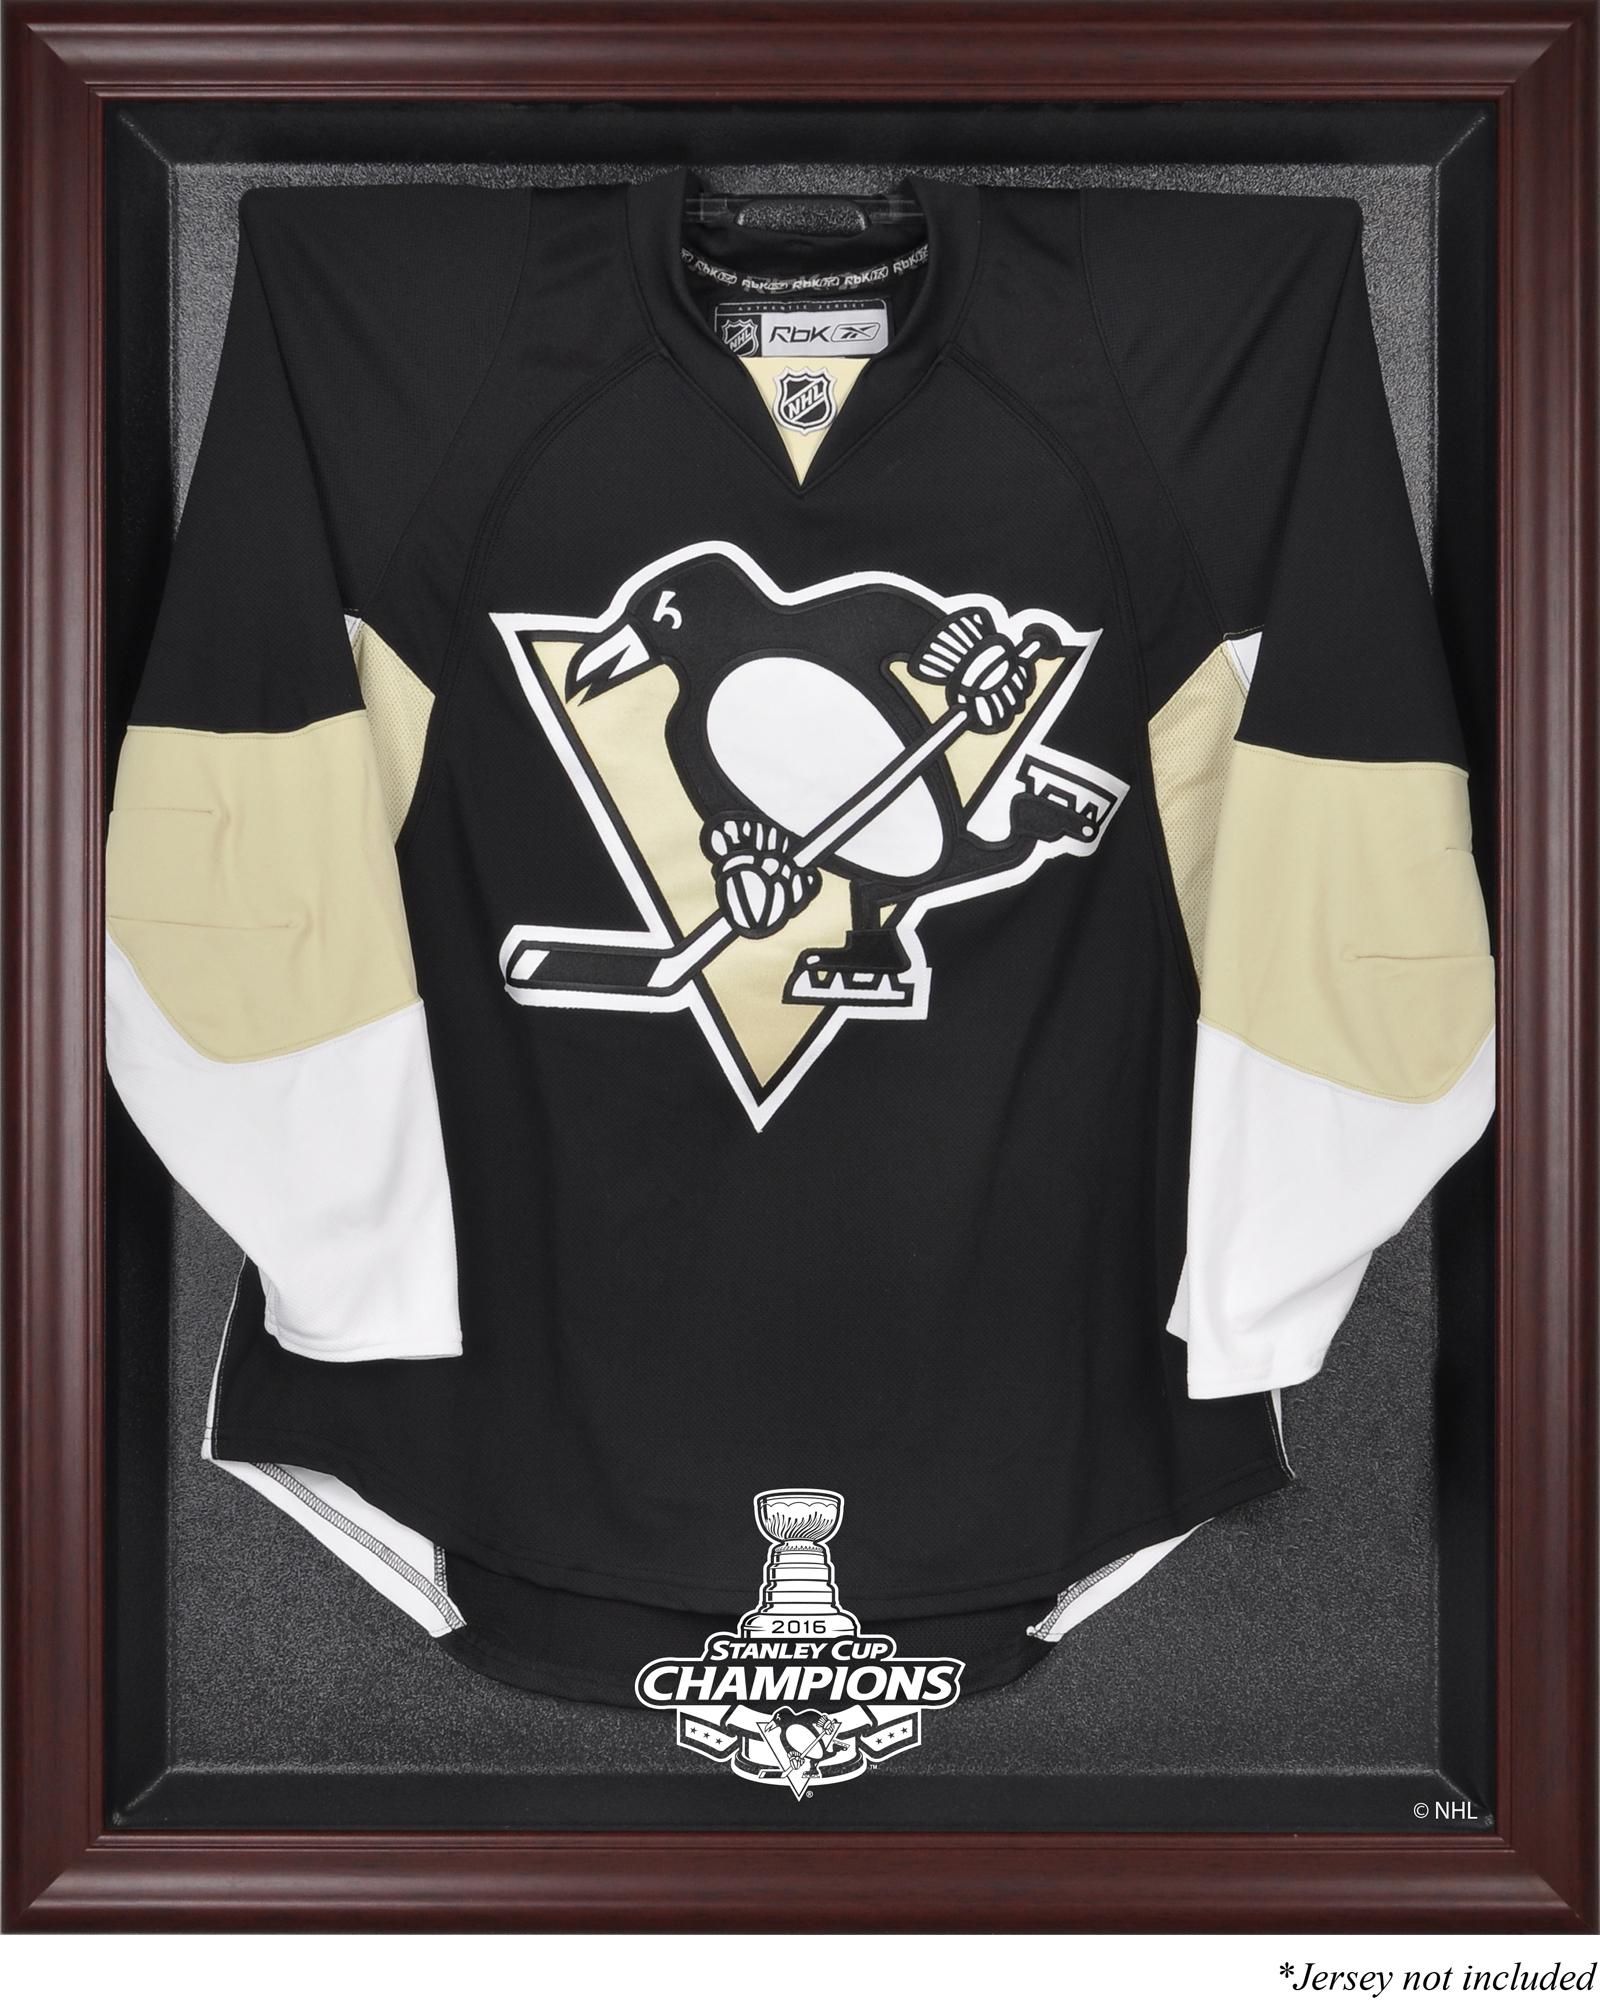 pittsburgh penguins 2016 jersey